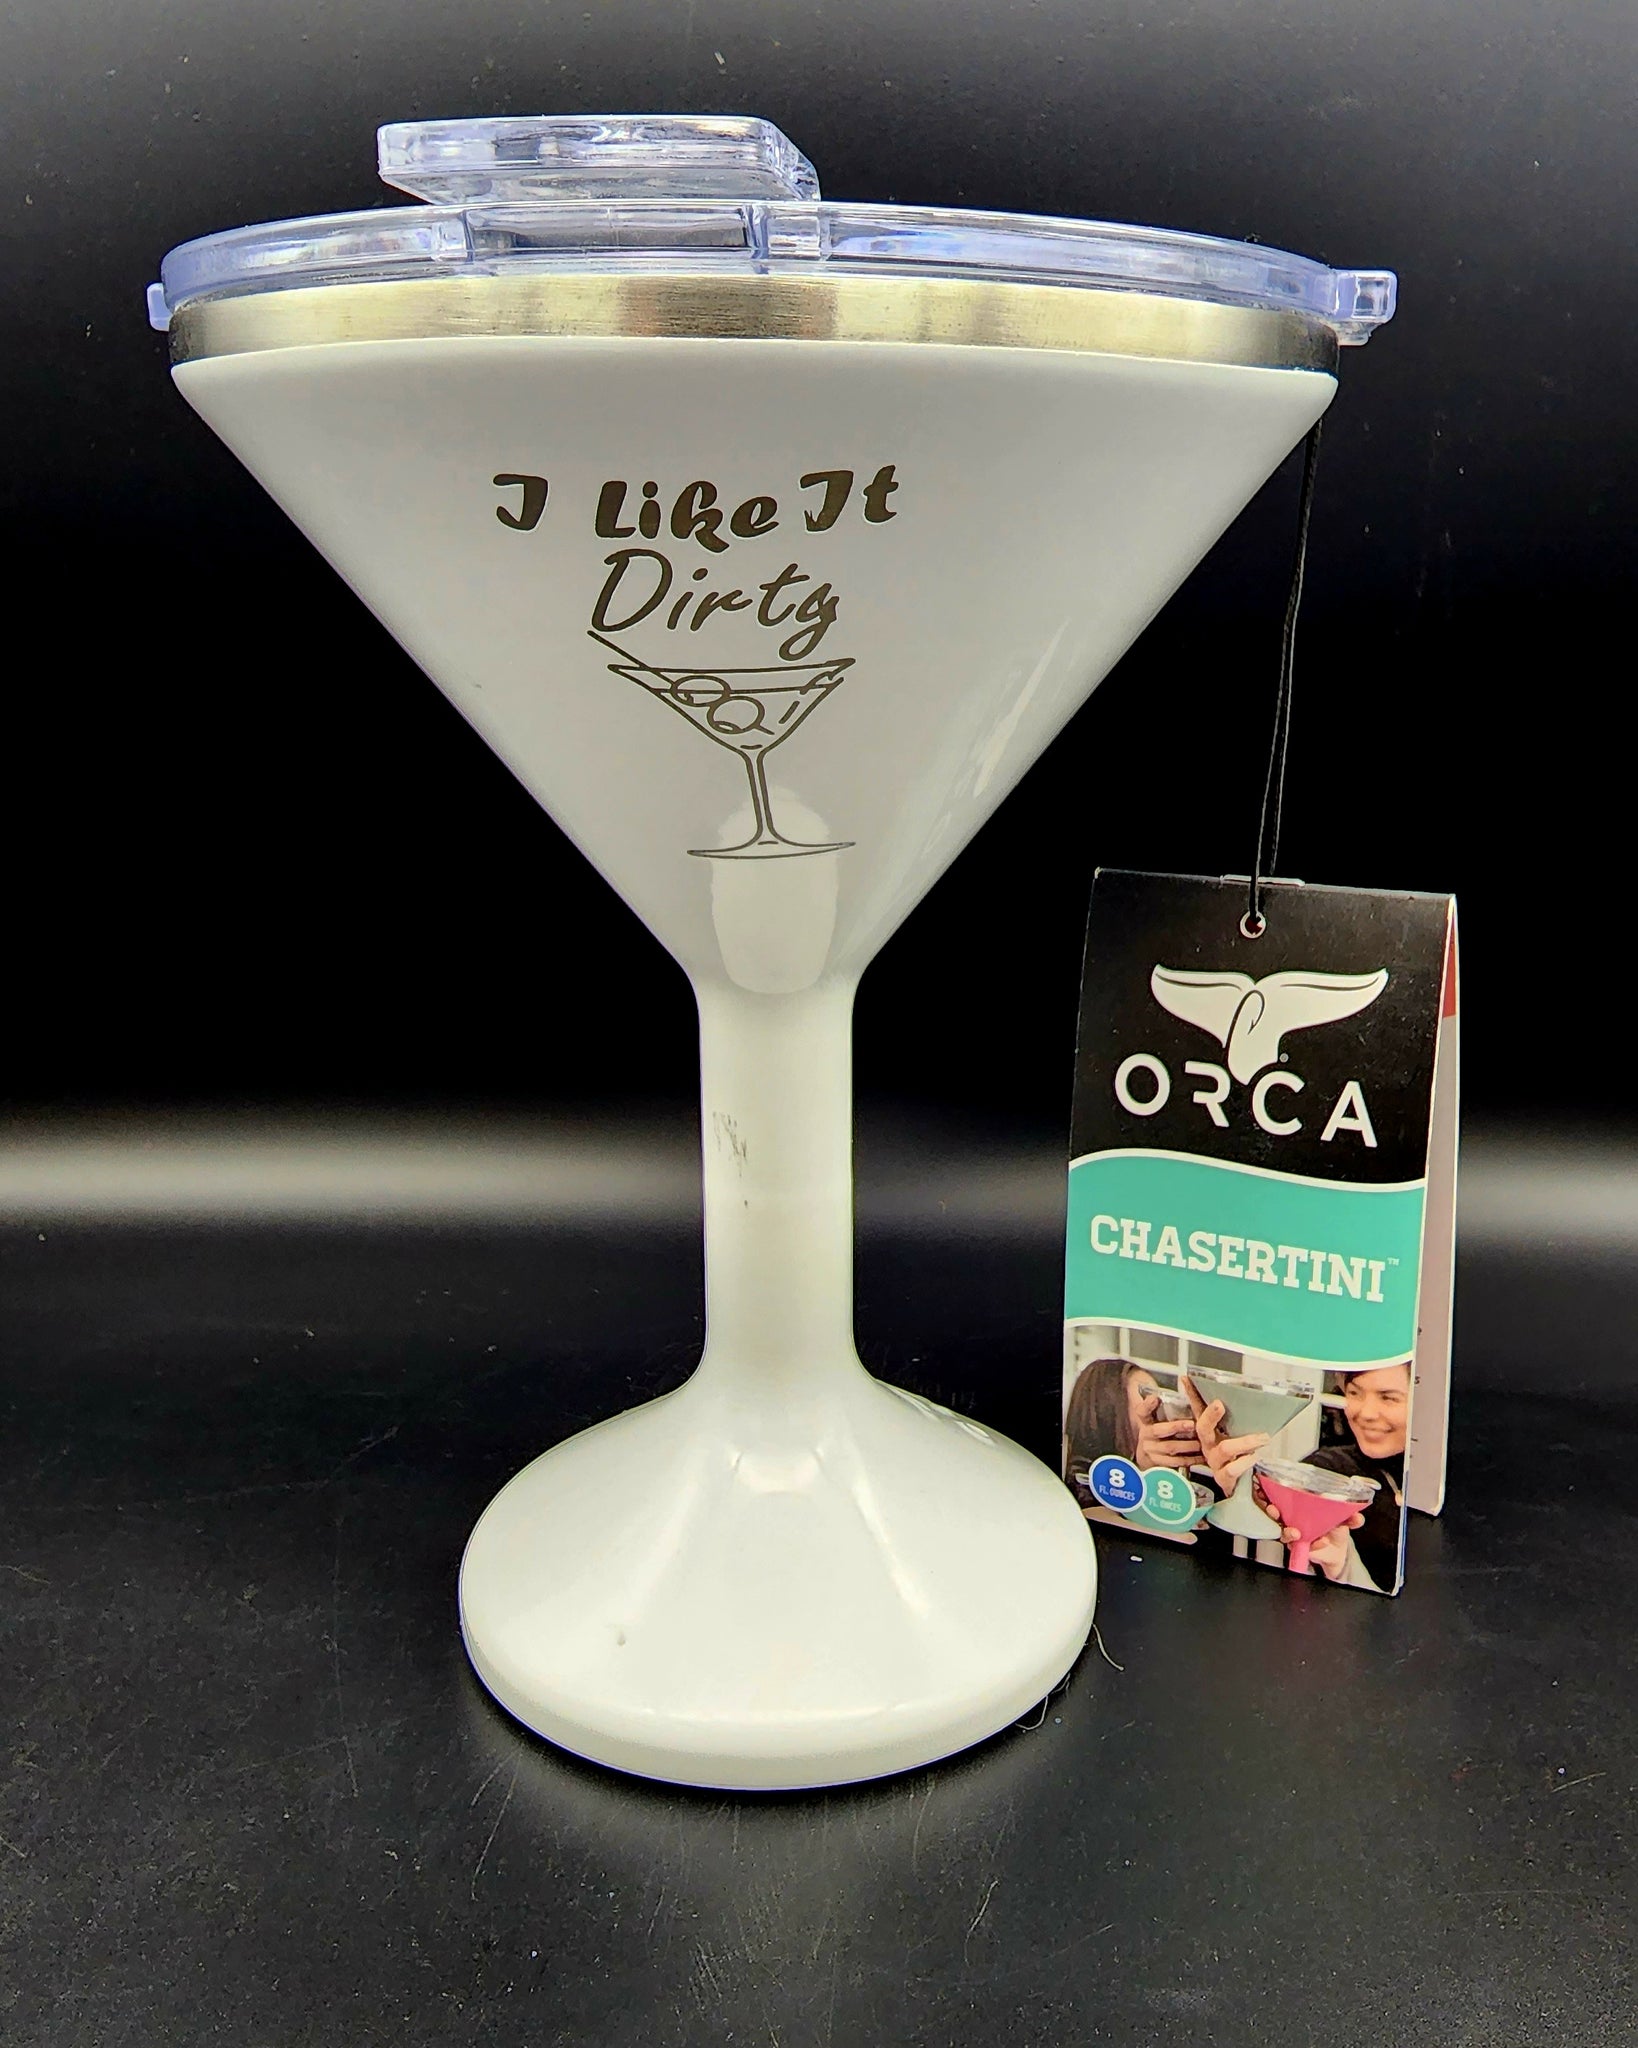 ORCA Chasertini Insulated Martini Style Sipping Cup with Lid -  Stainless Steel for Outdoor, Picnic, Poolside, Beach or Patio Party - Pink: Martini  Glasses